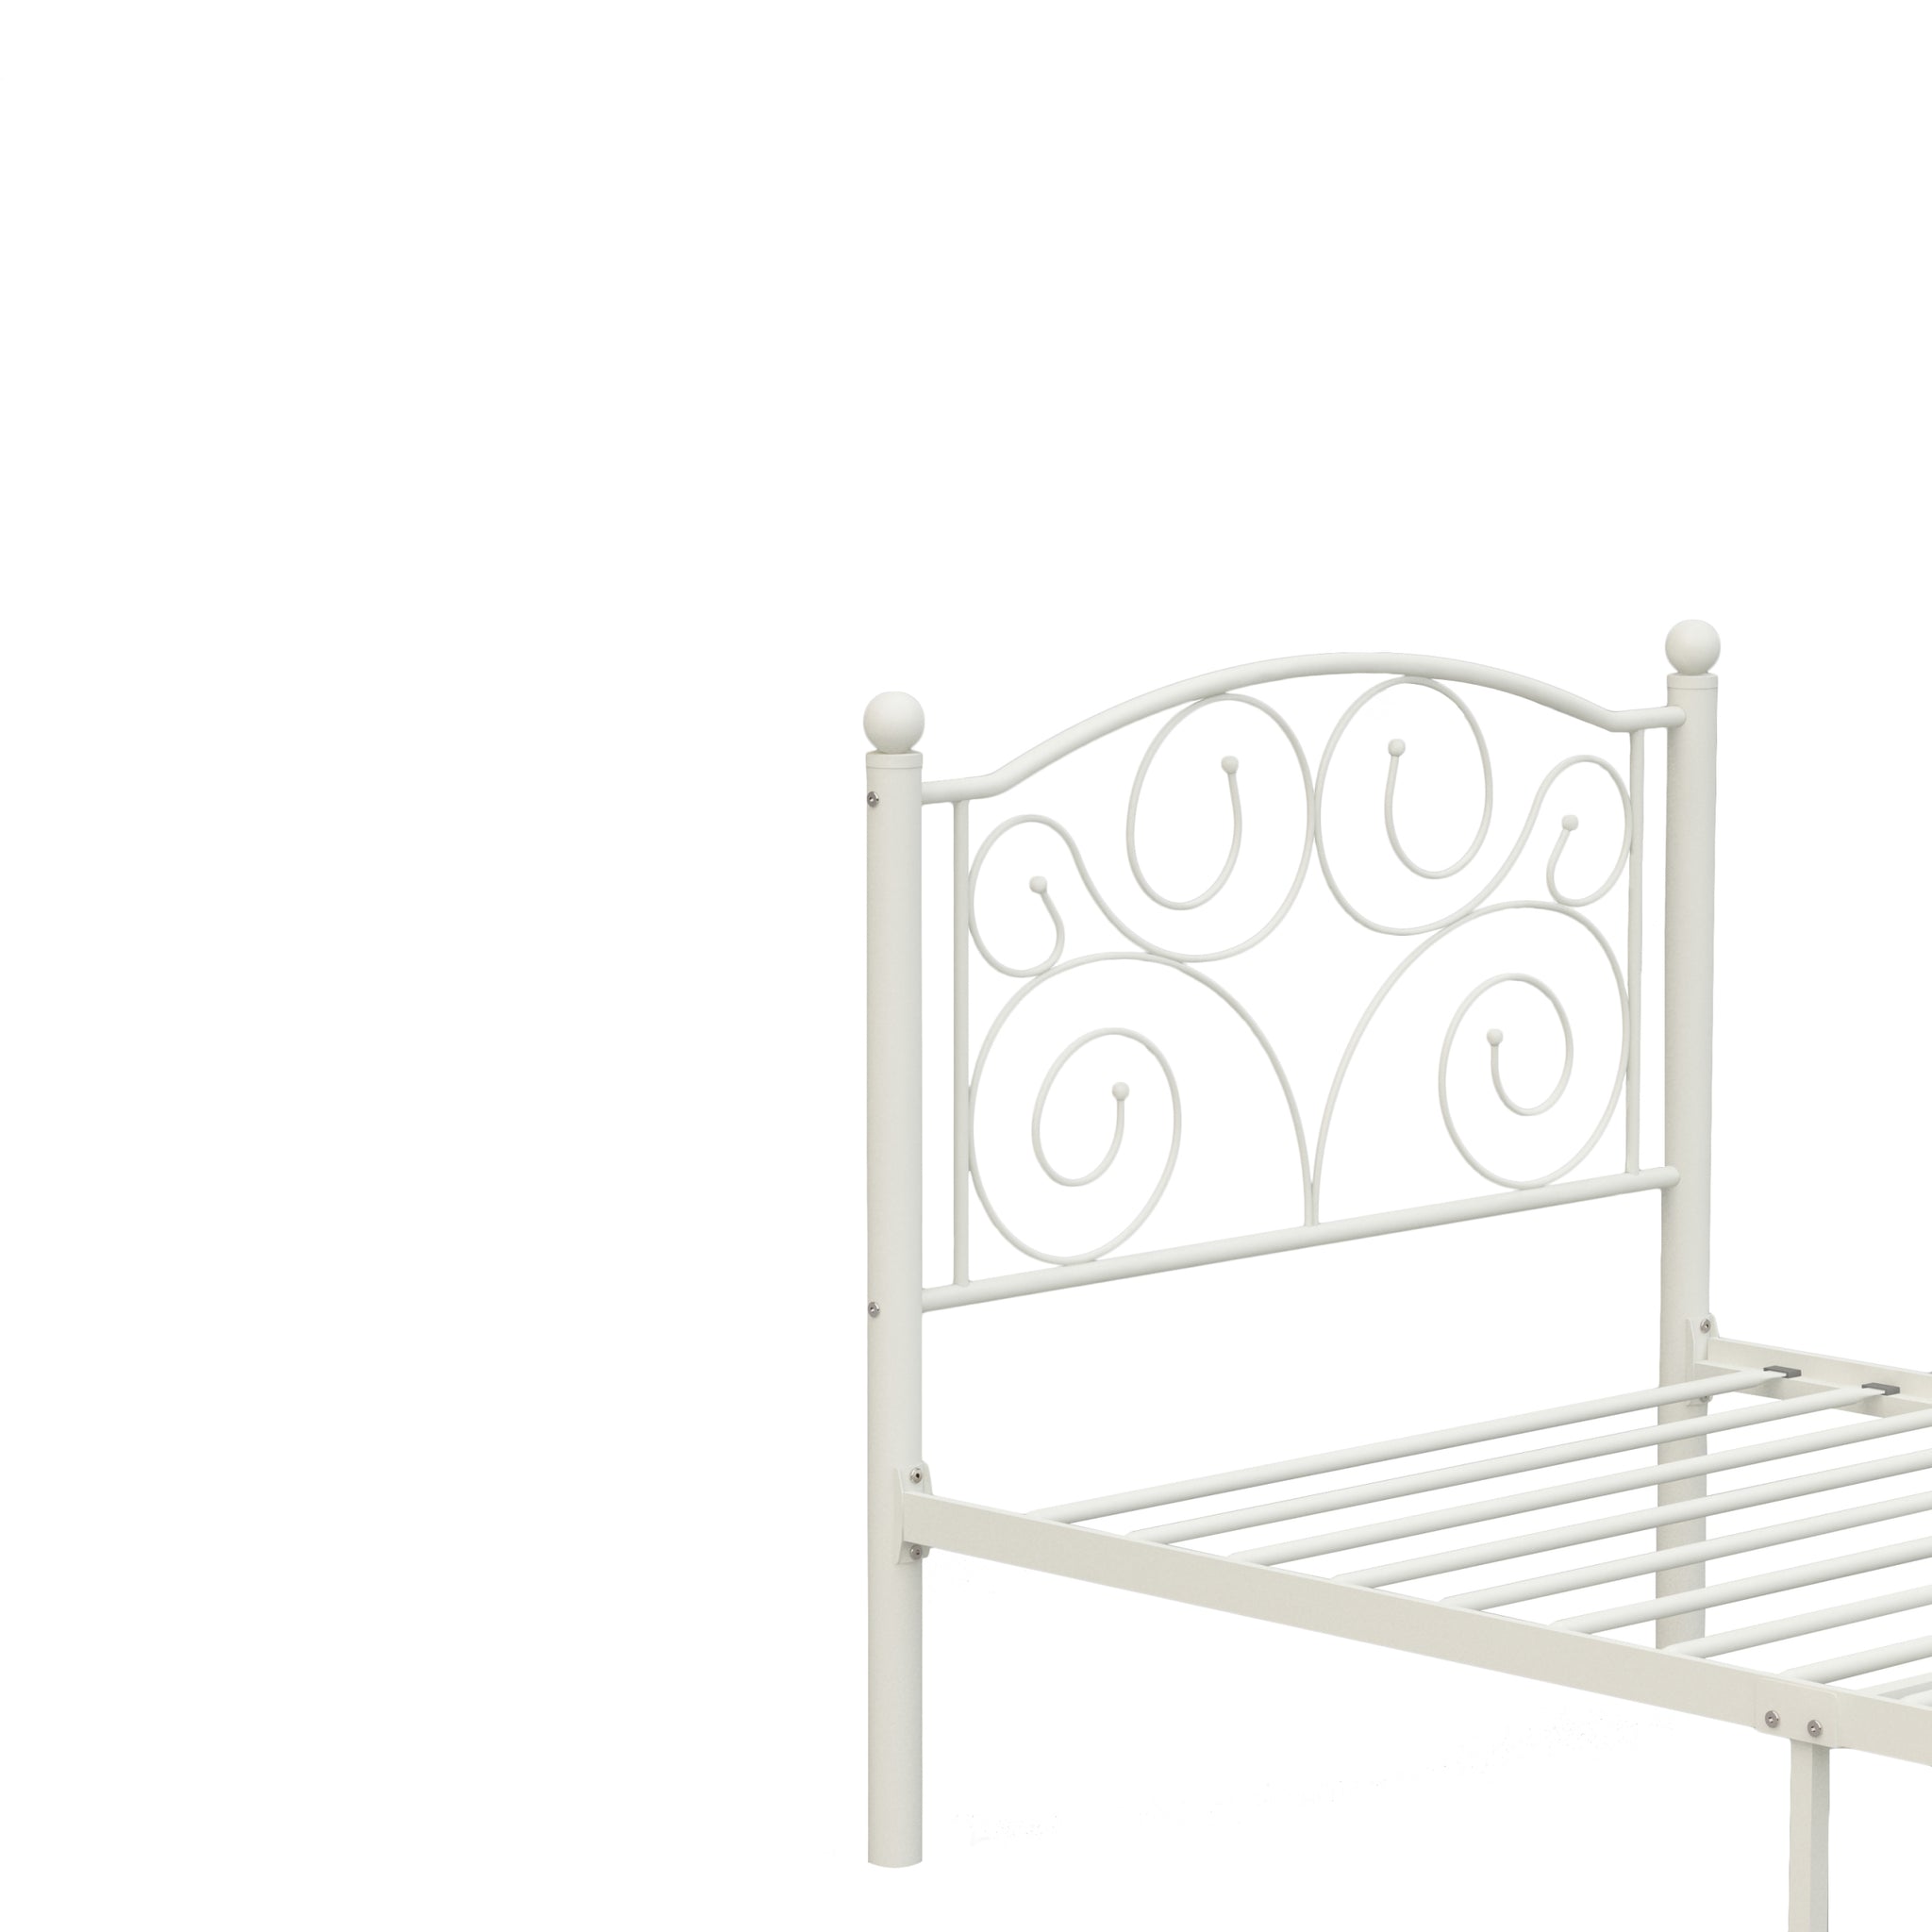 Twin Size Unique Flower Sturdy System Metal Bed Frame white-metal